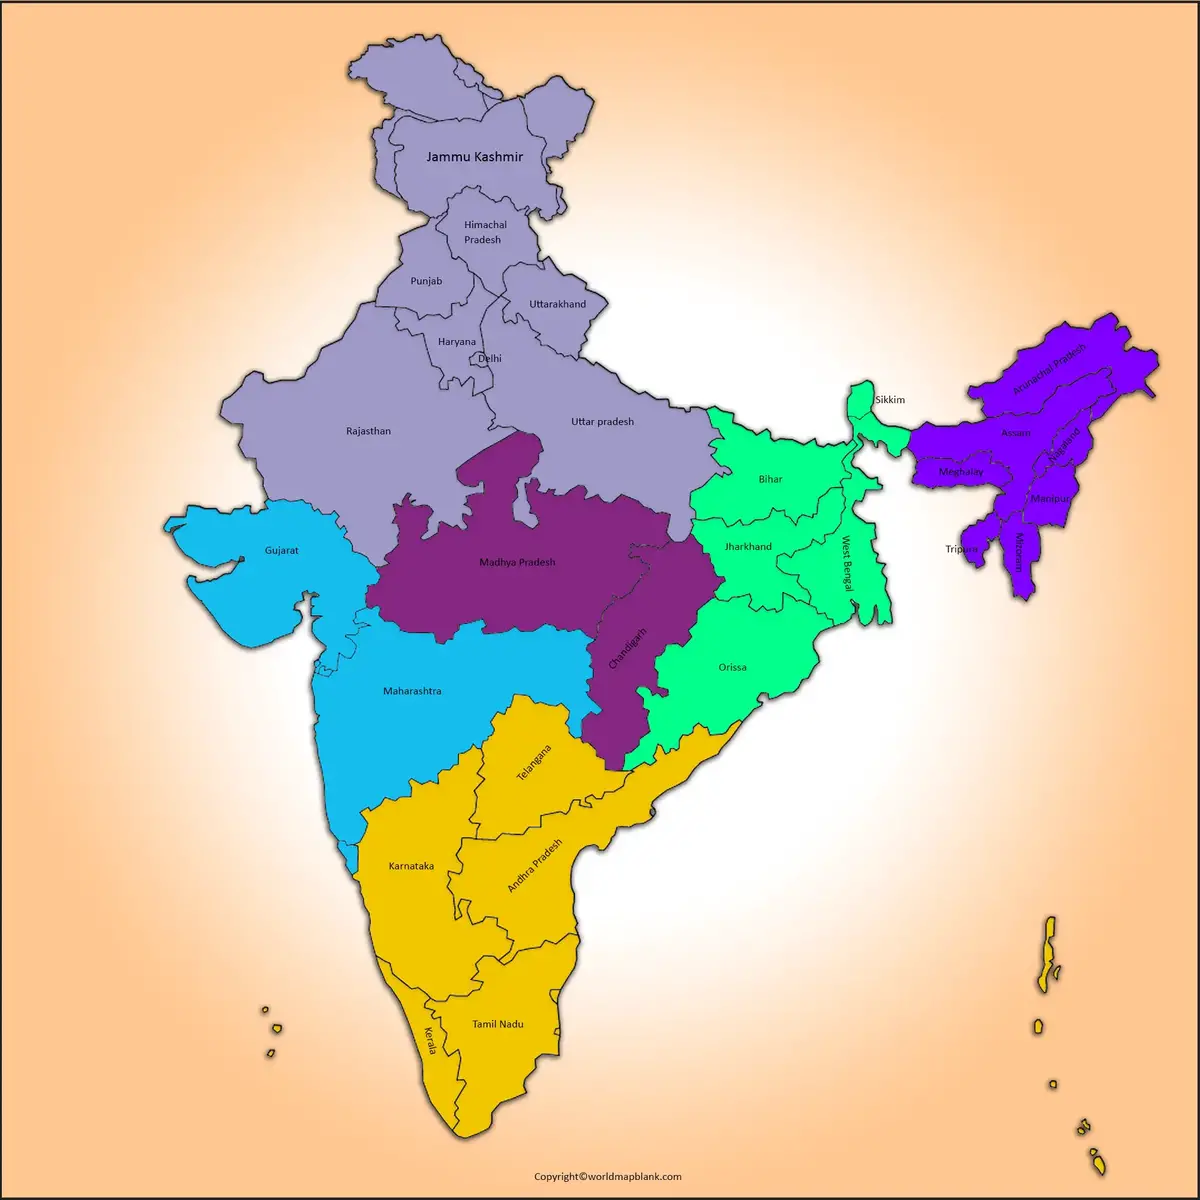 Labeled Map of India